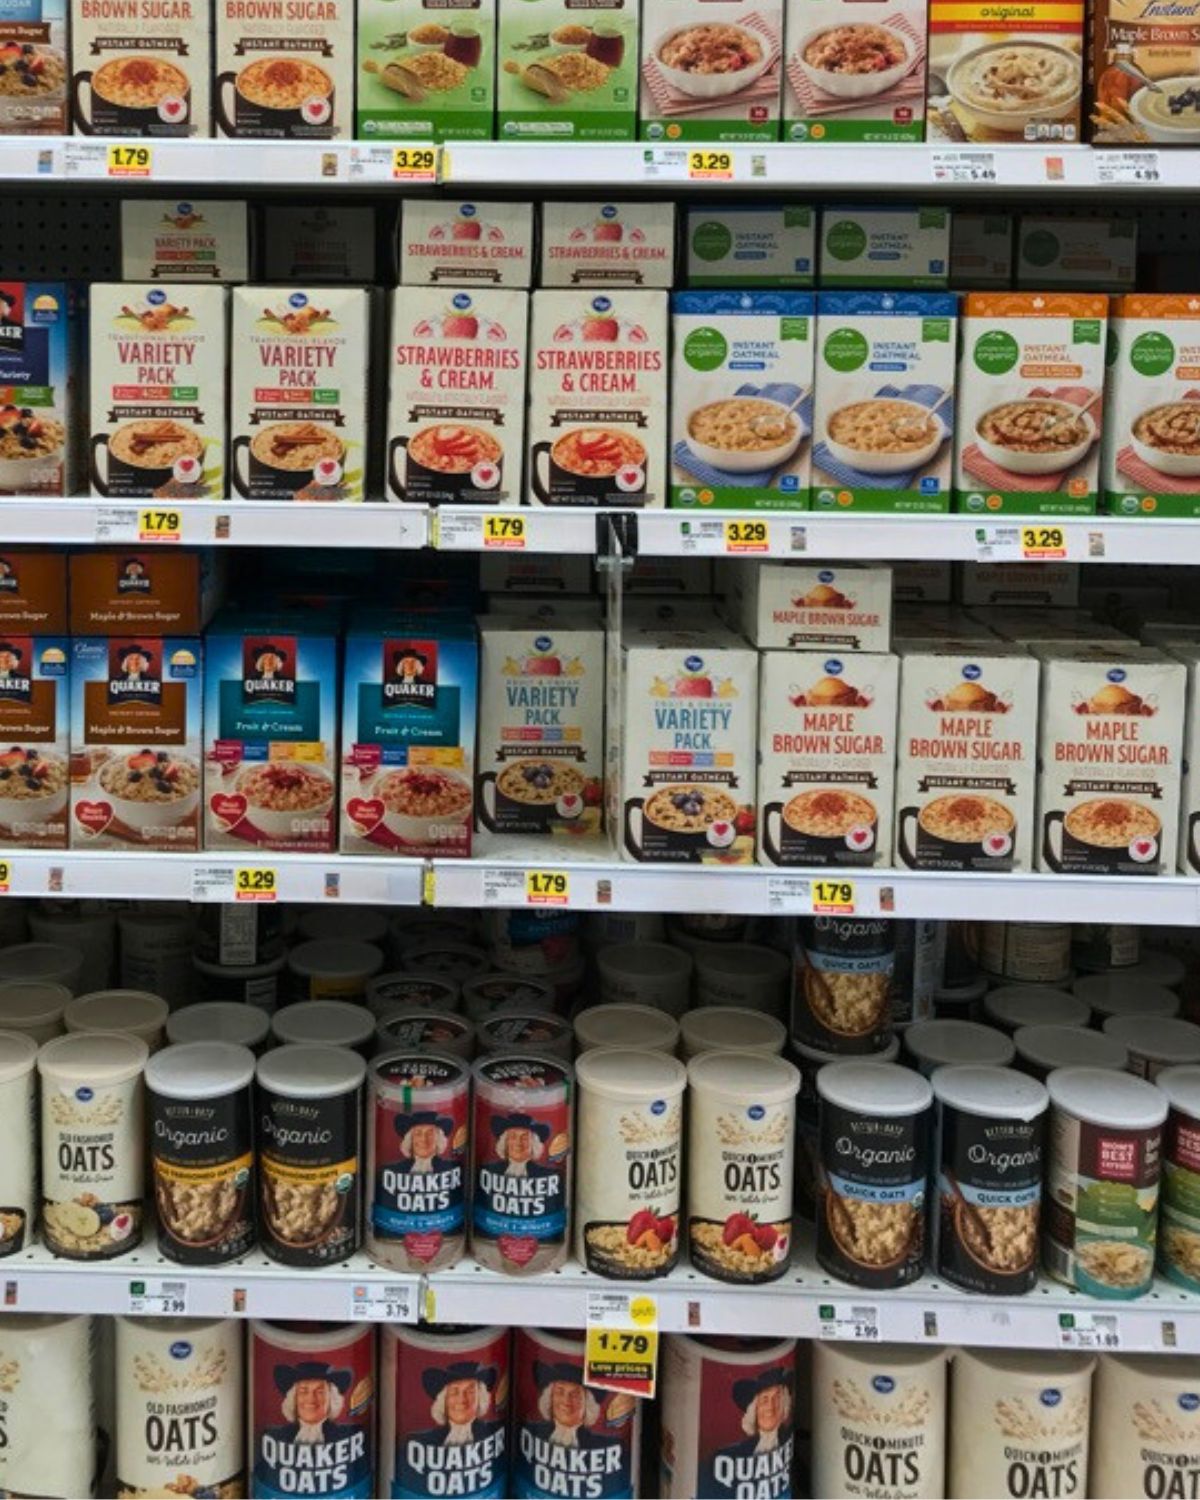 array of oats packages on the shelves at the grocery store.